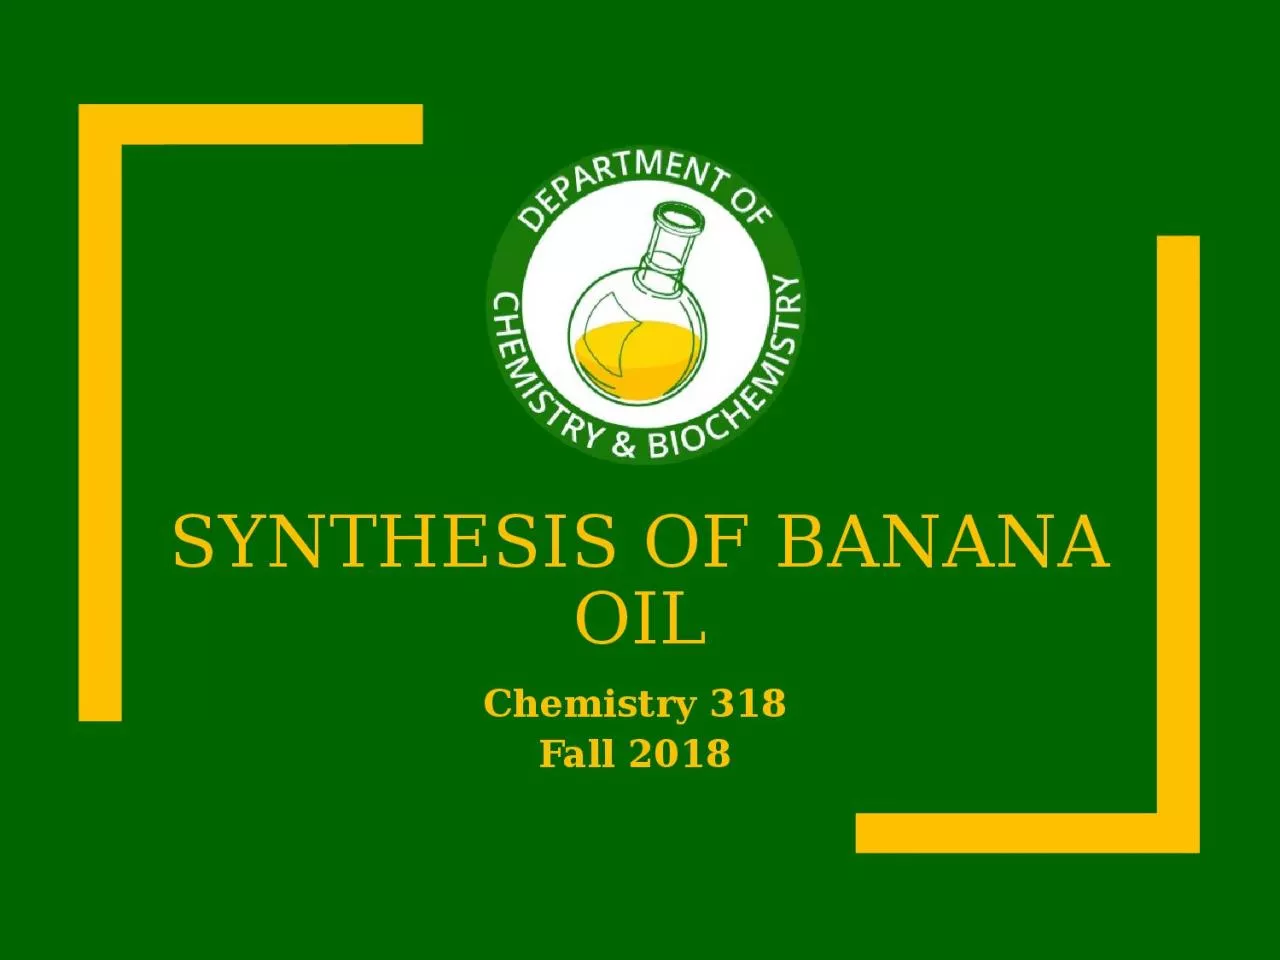 Synthesis of Banana Oil Chemistry 318